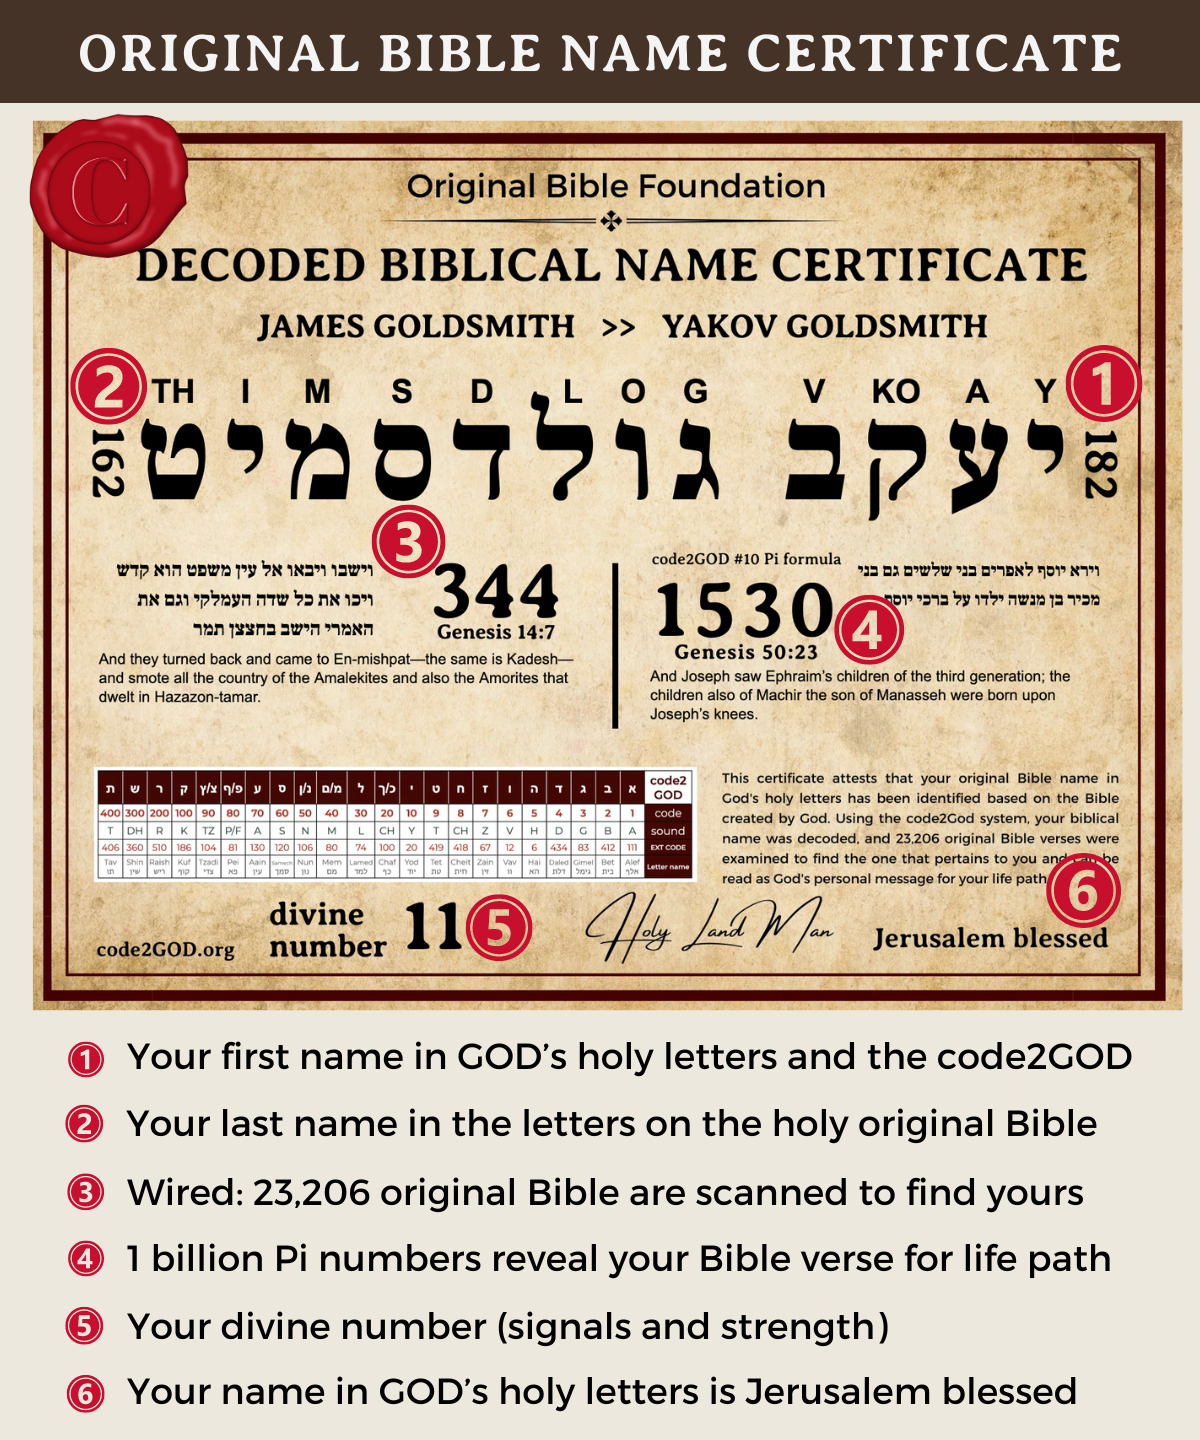 DISCOVER YOUR ❤️ DECODED BIBLICAL NAME IN GOD's HOLY LETTERS